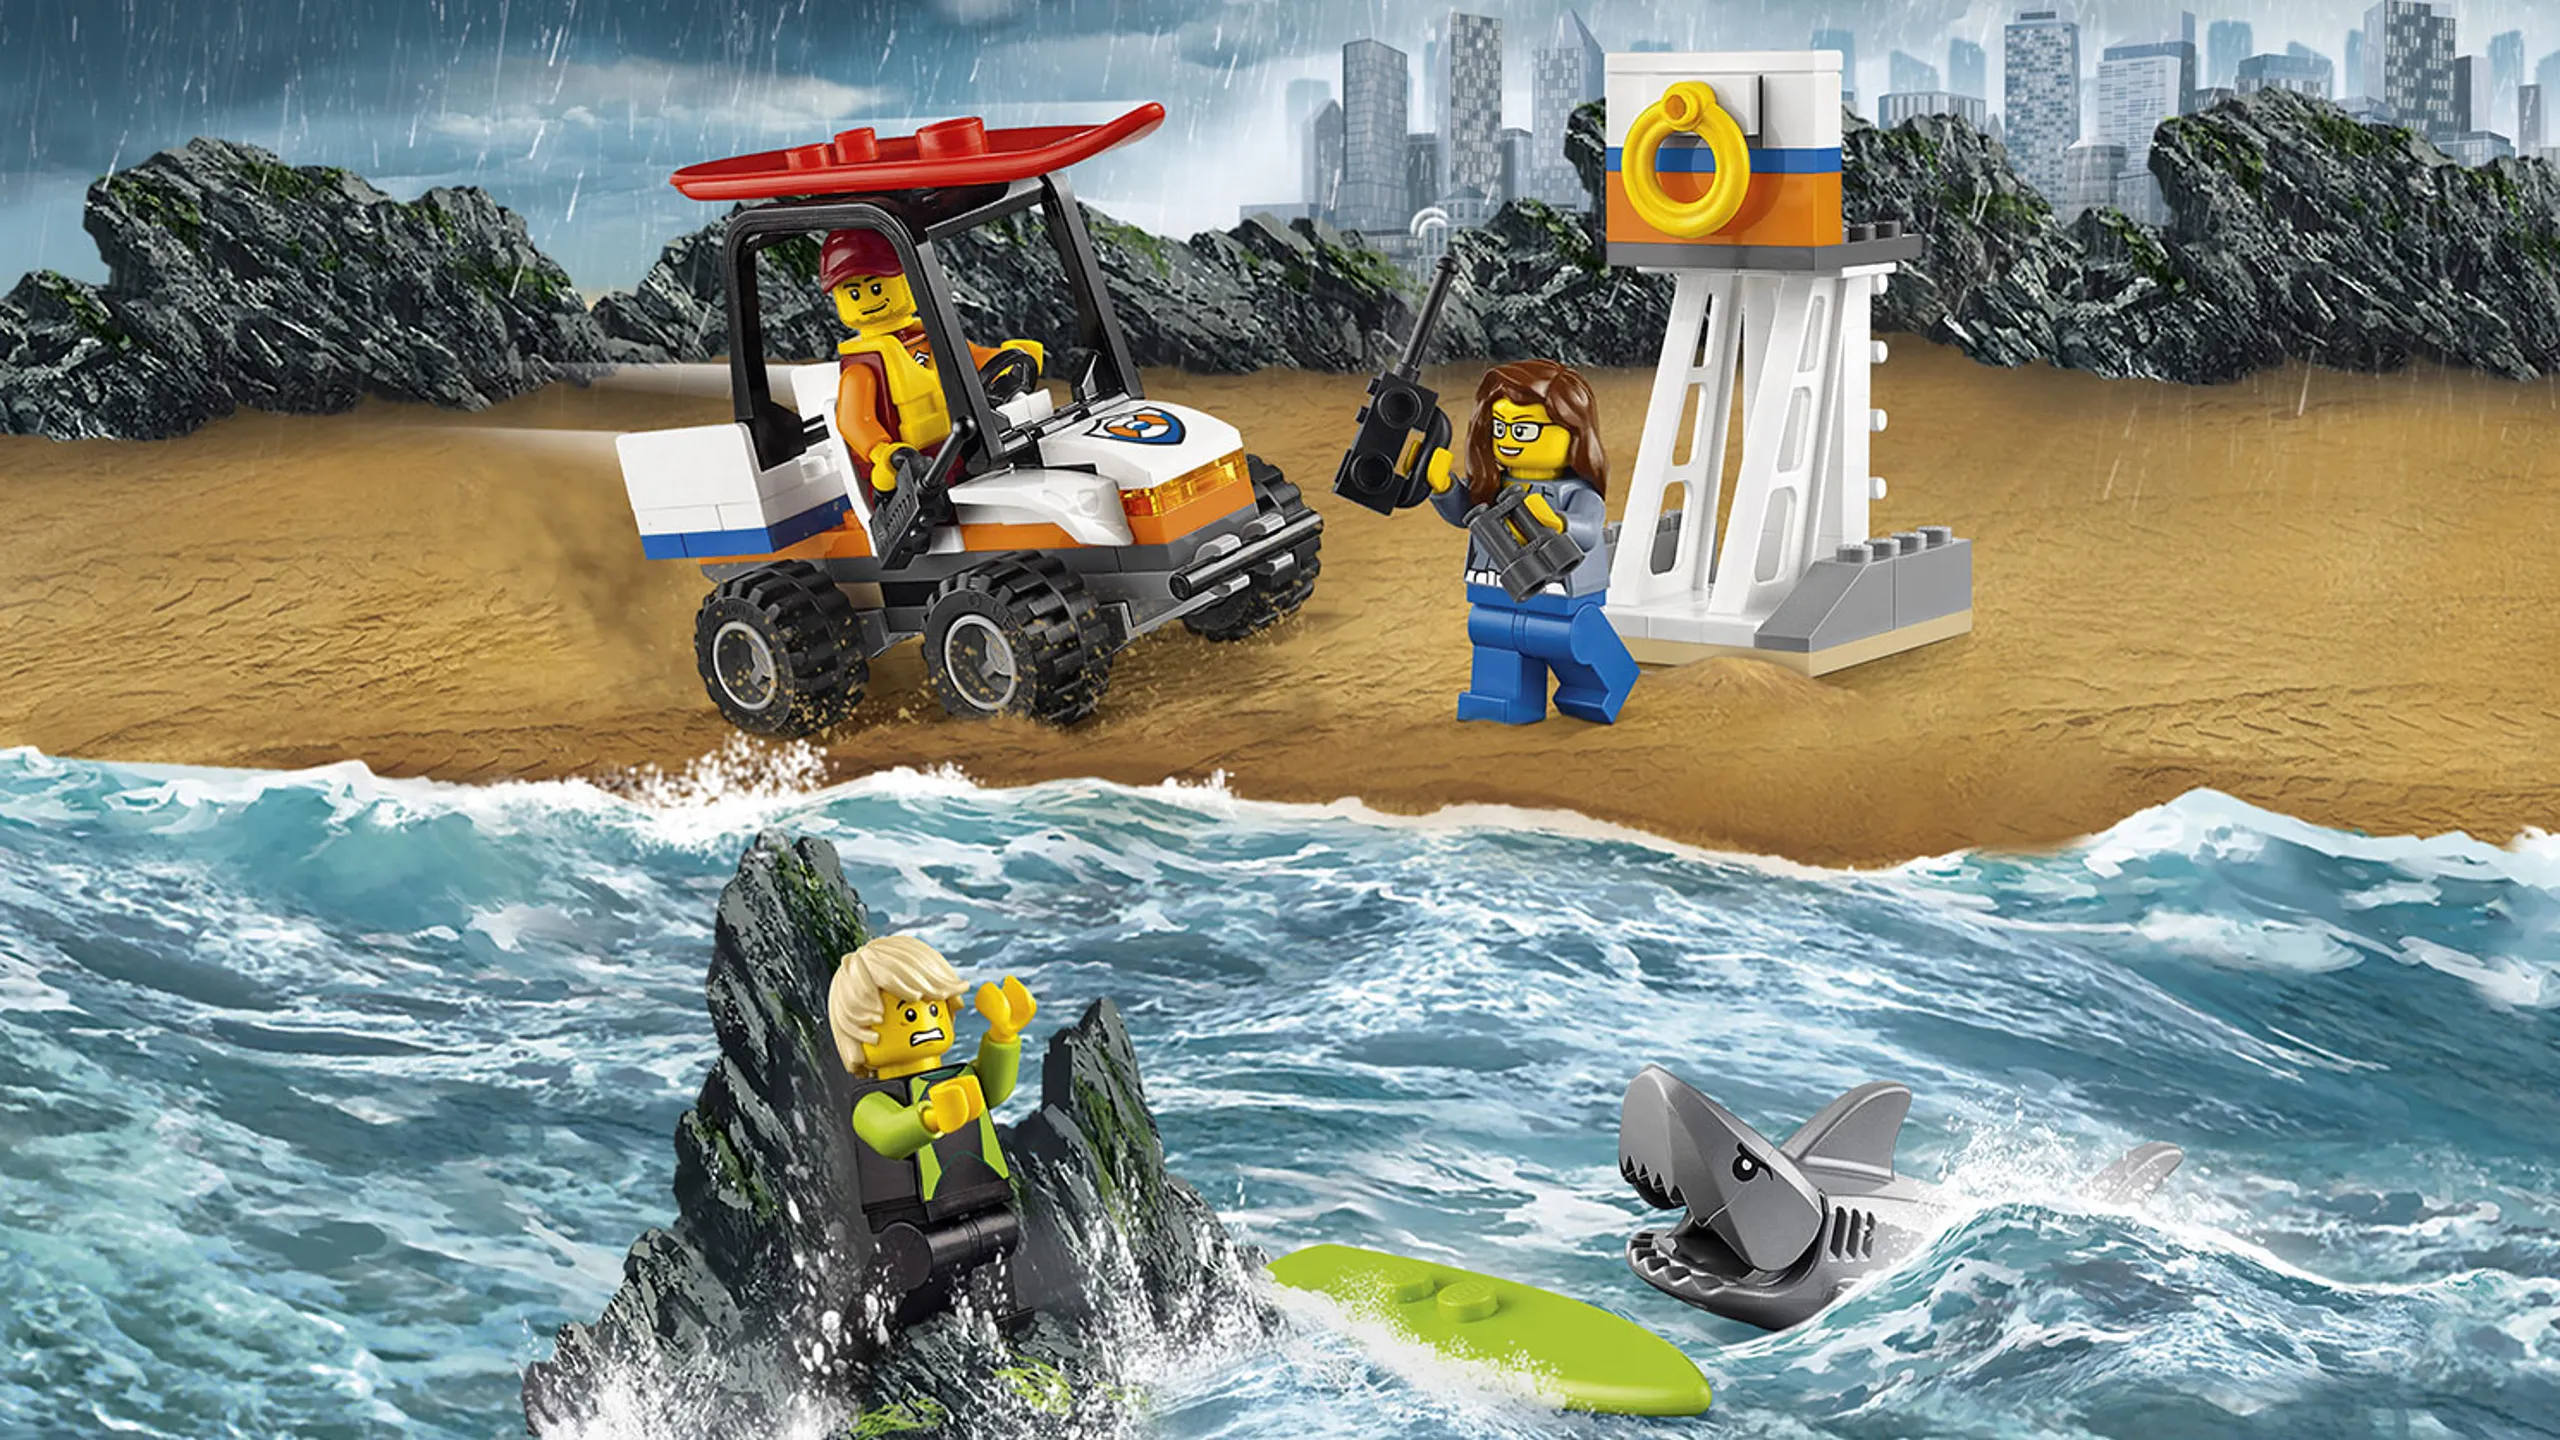 LEGO City Coast Guard - 60163 Coast Guard Starter Set - The stranded surfer is attacked by a shark! Race to the beach in the buggy, grab the surfboard and rescue the surfer.